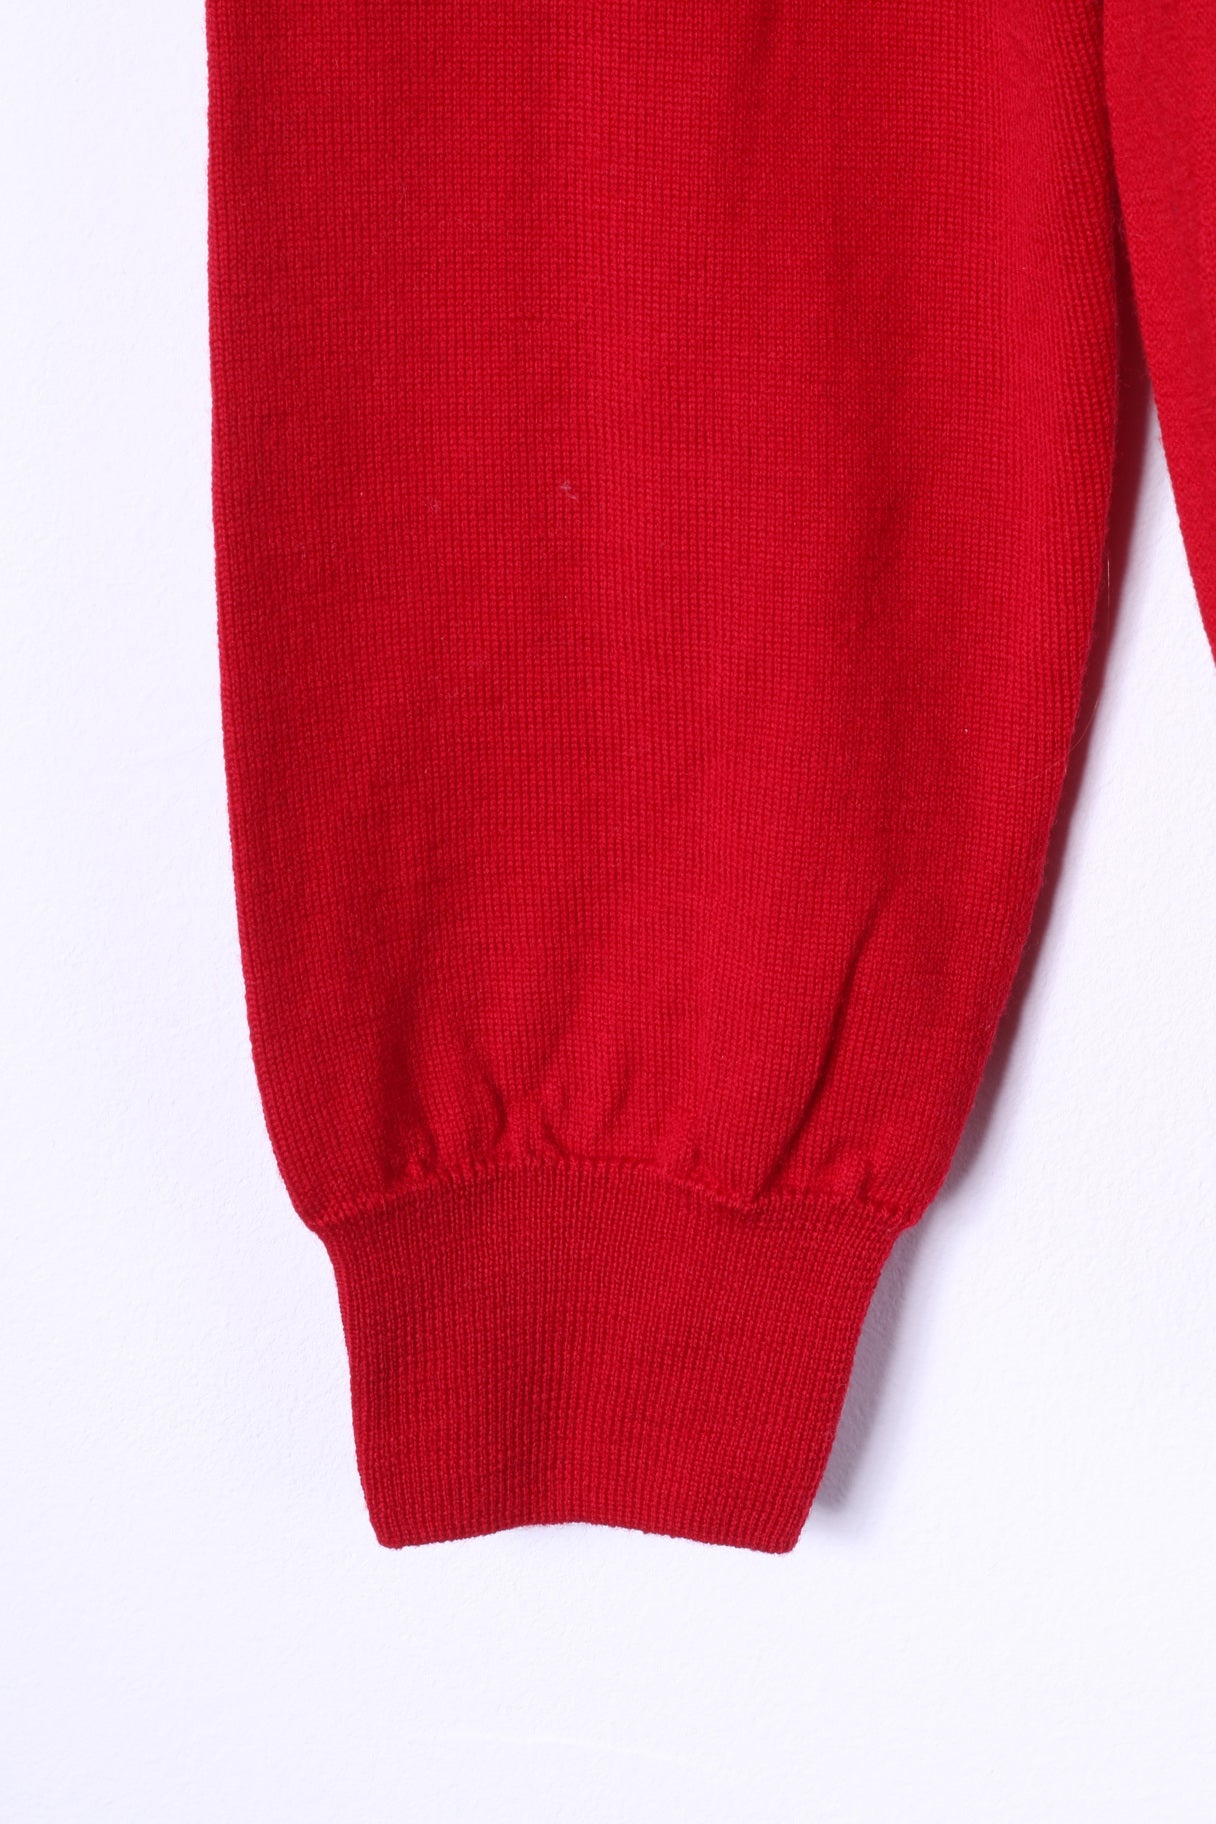 BECOME Mens L Jumper Red 100% Wool Soft V Neck Sweater Top